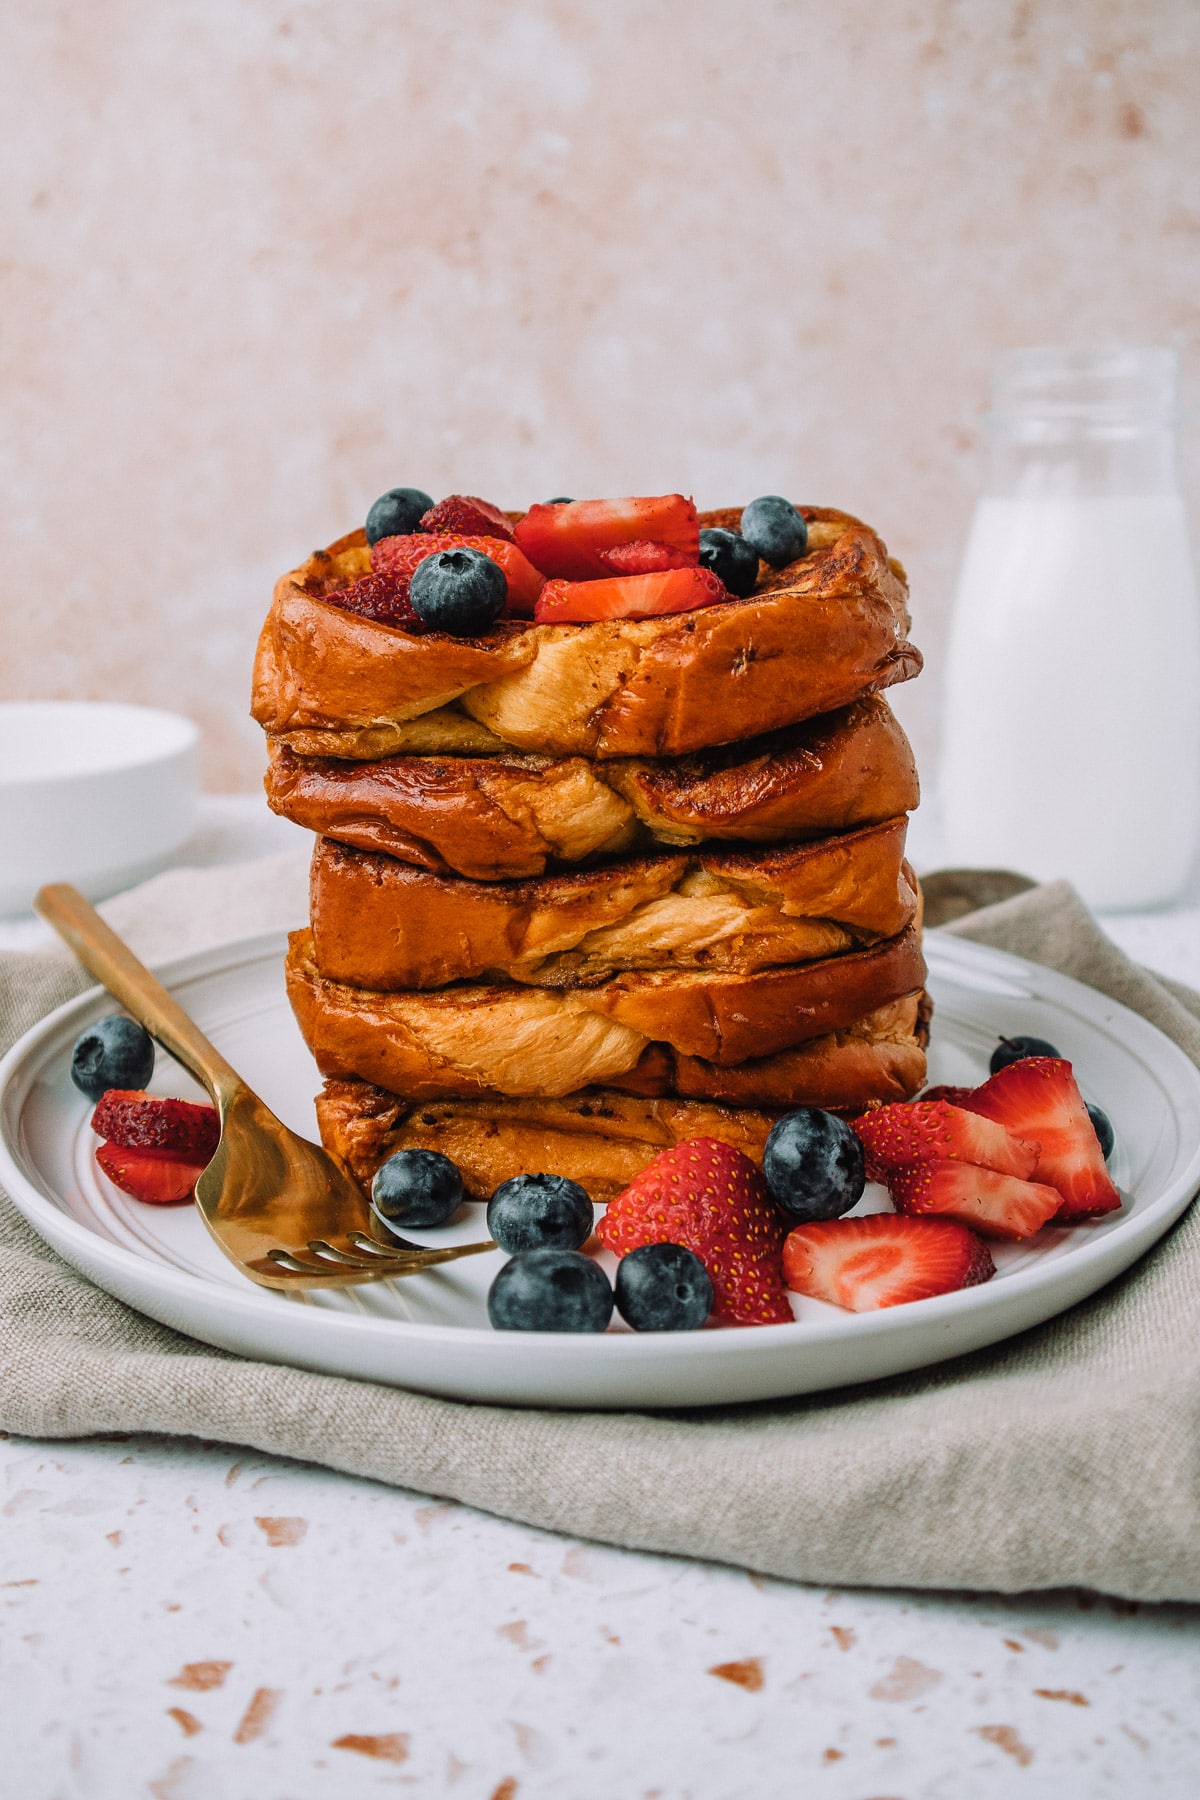 Delicious slices of brioche french toast stacked on a plate with fresh strawberries and blueberries for a yummy breakfast or brunch